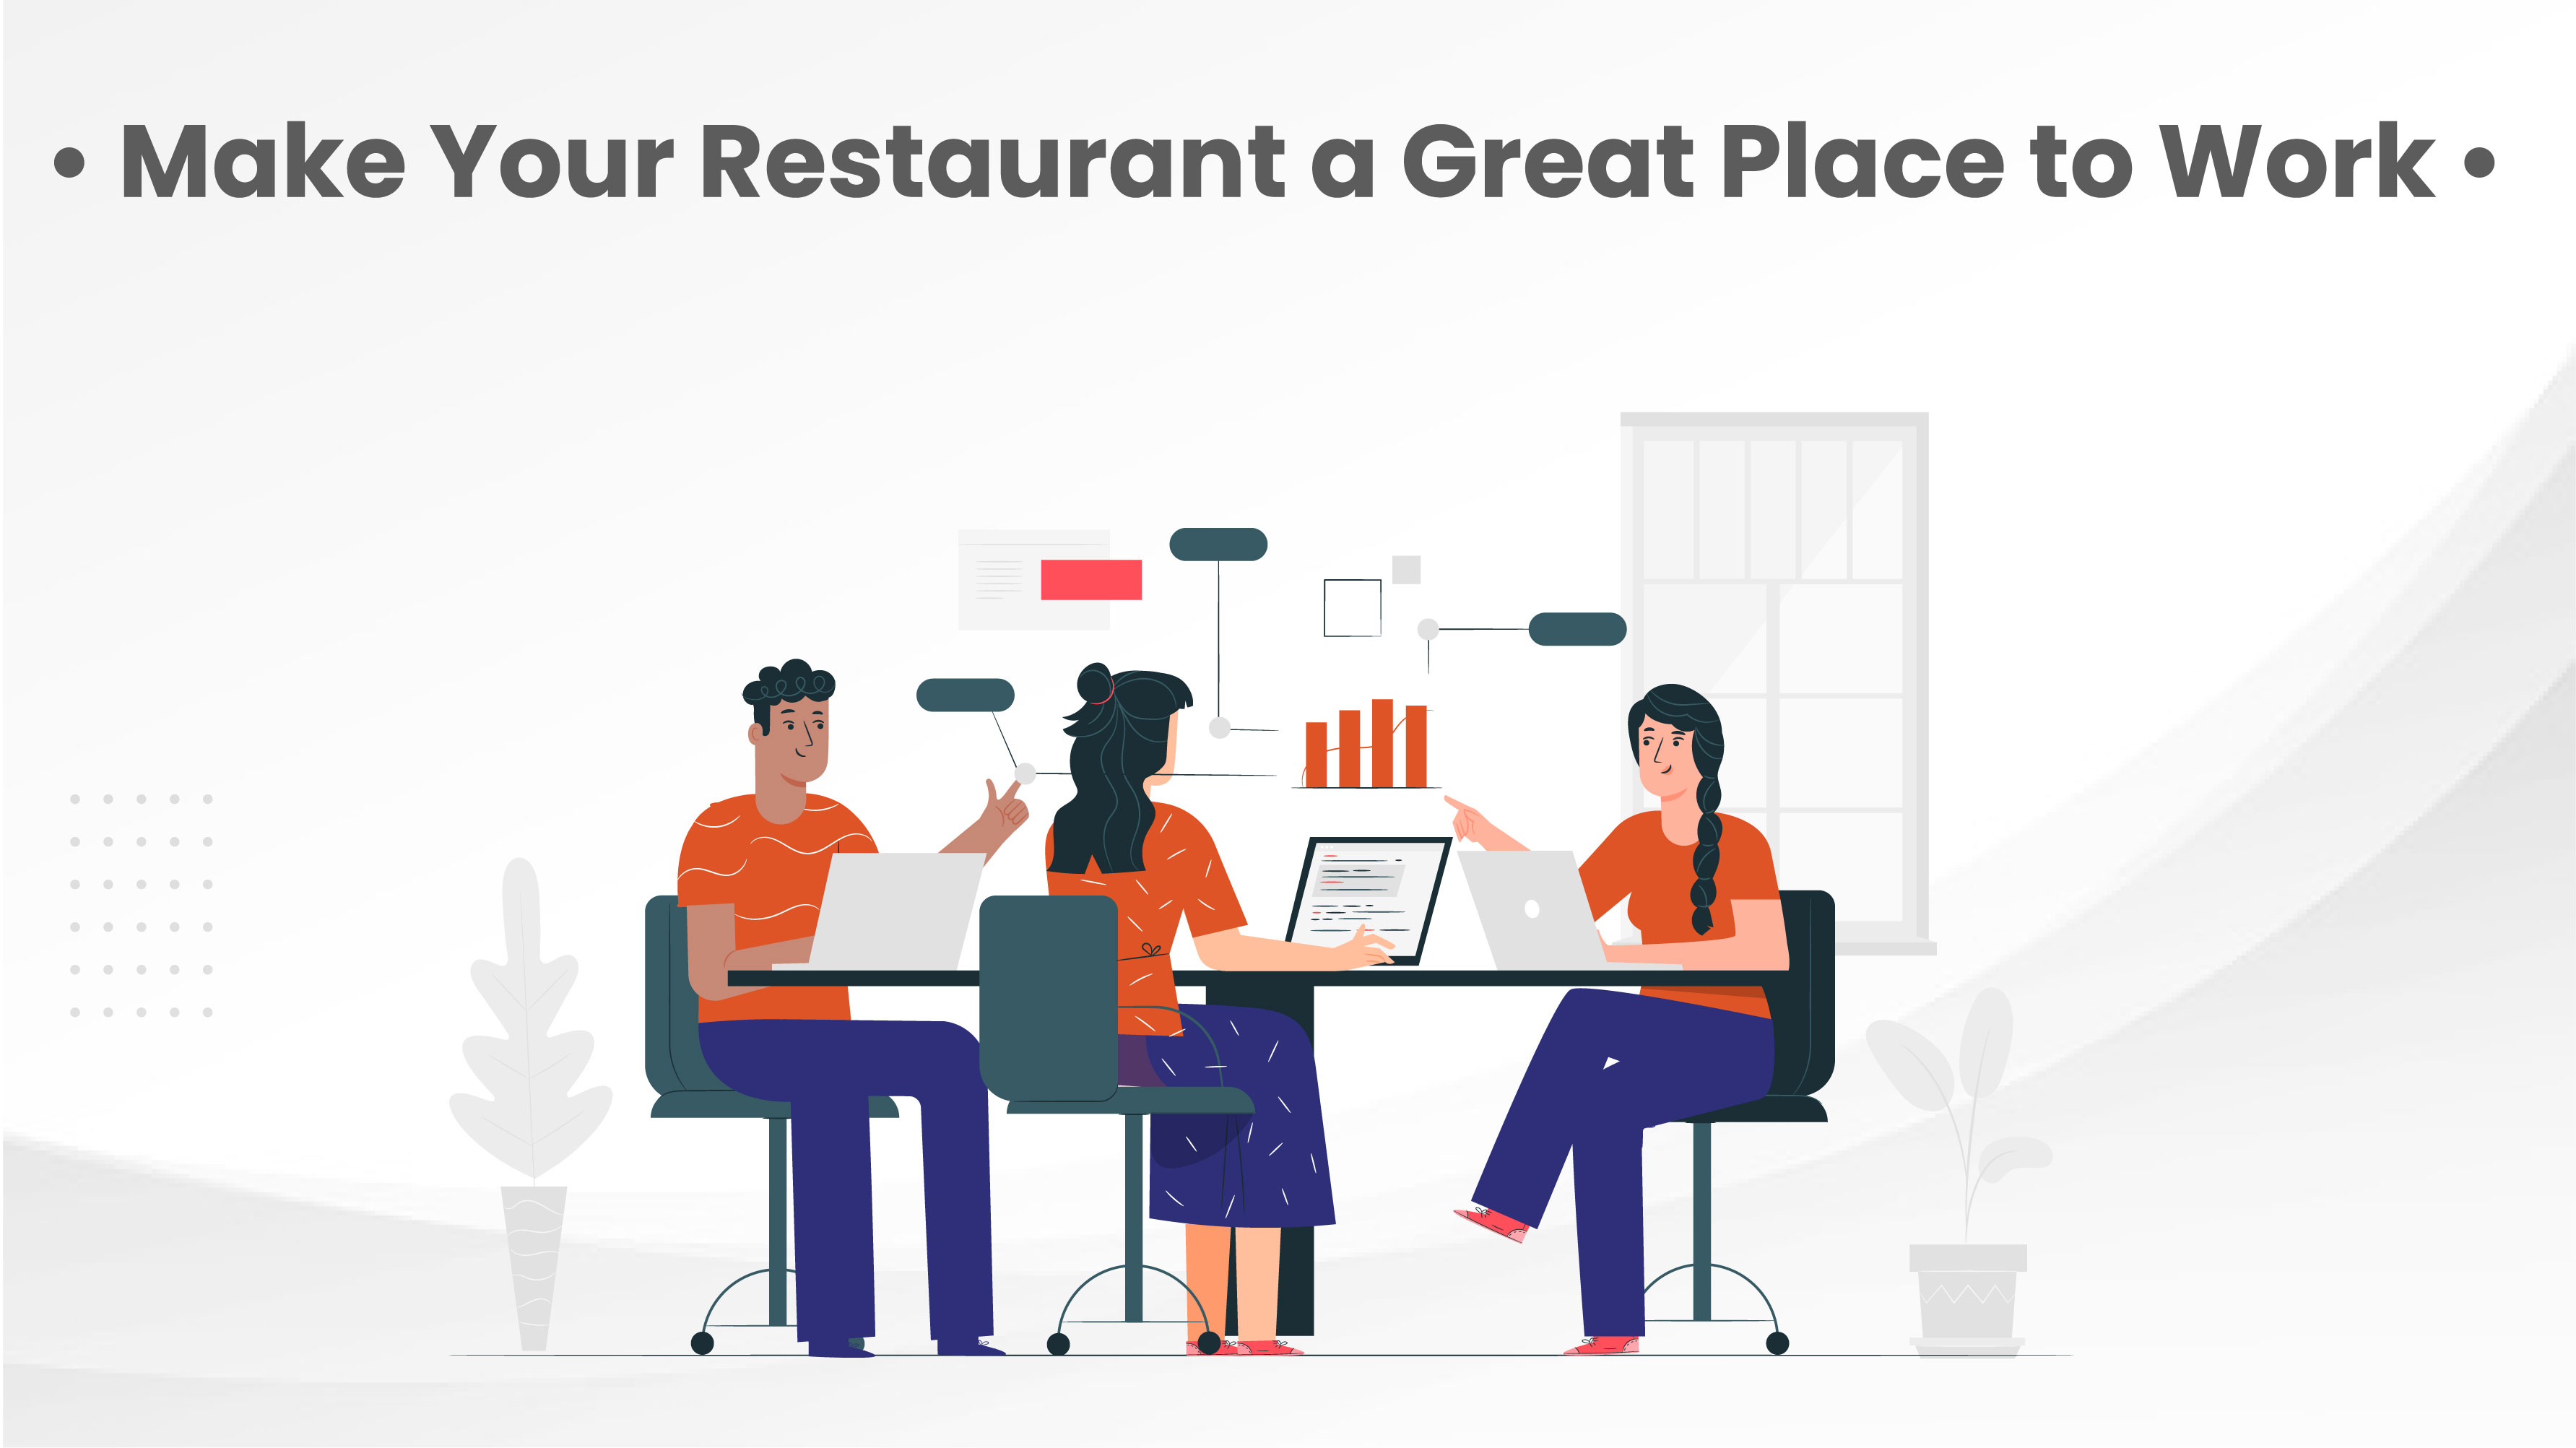 Make your restaurant a great place to work